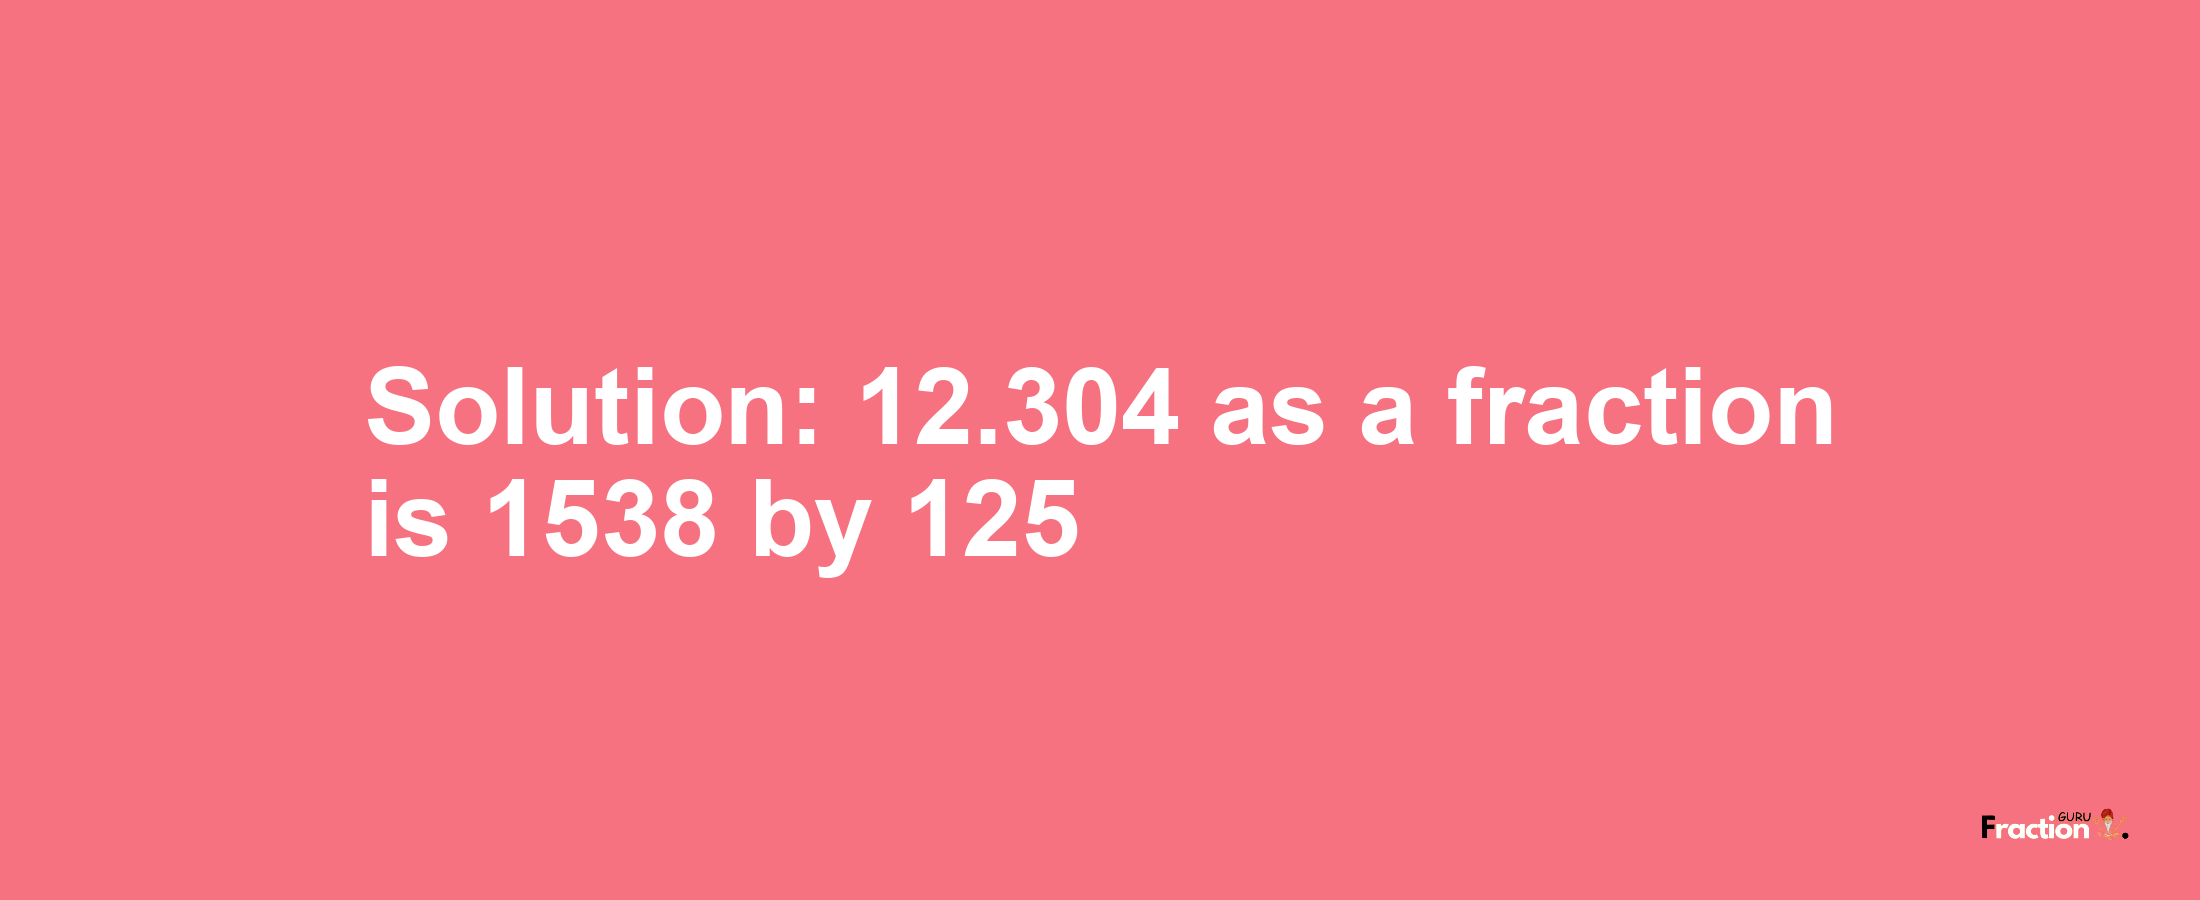 Solution:12.304 as a fraction is 1538/125